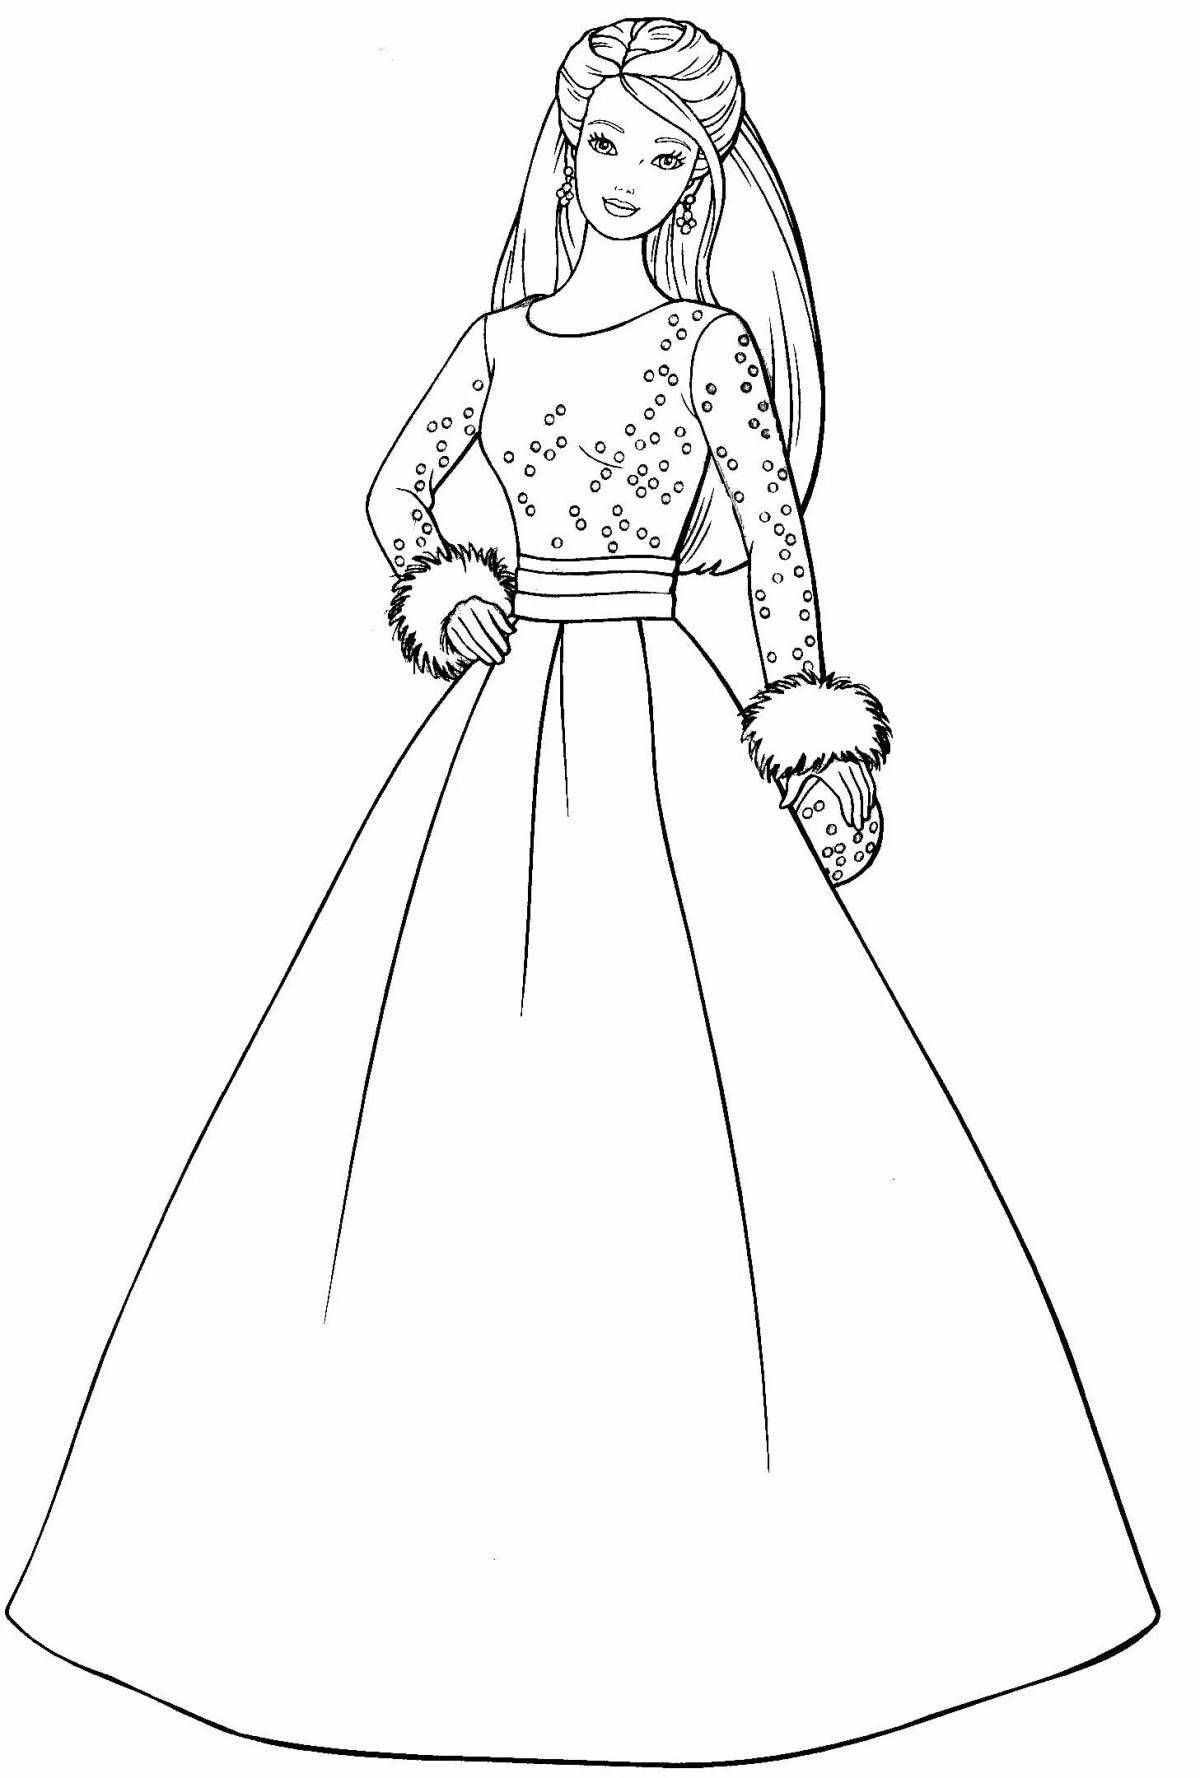 Gorgeous queen barbie coloring page